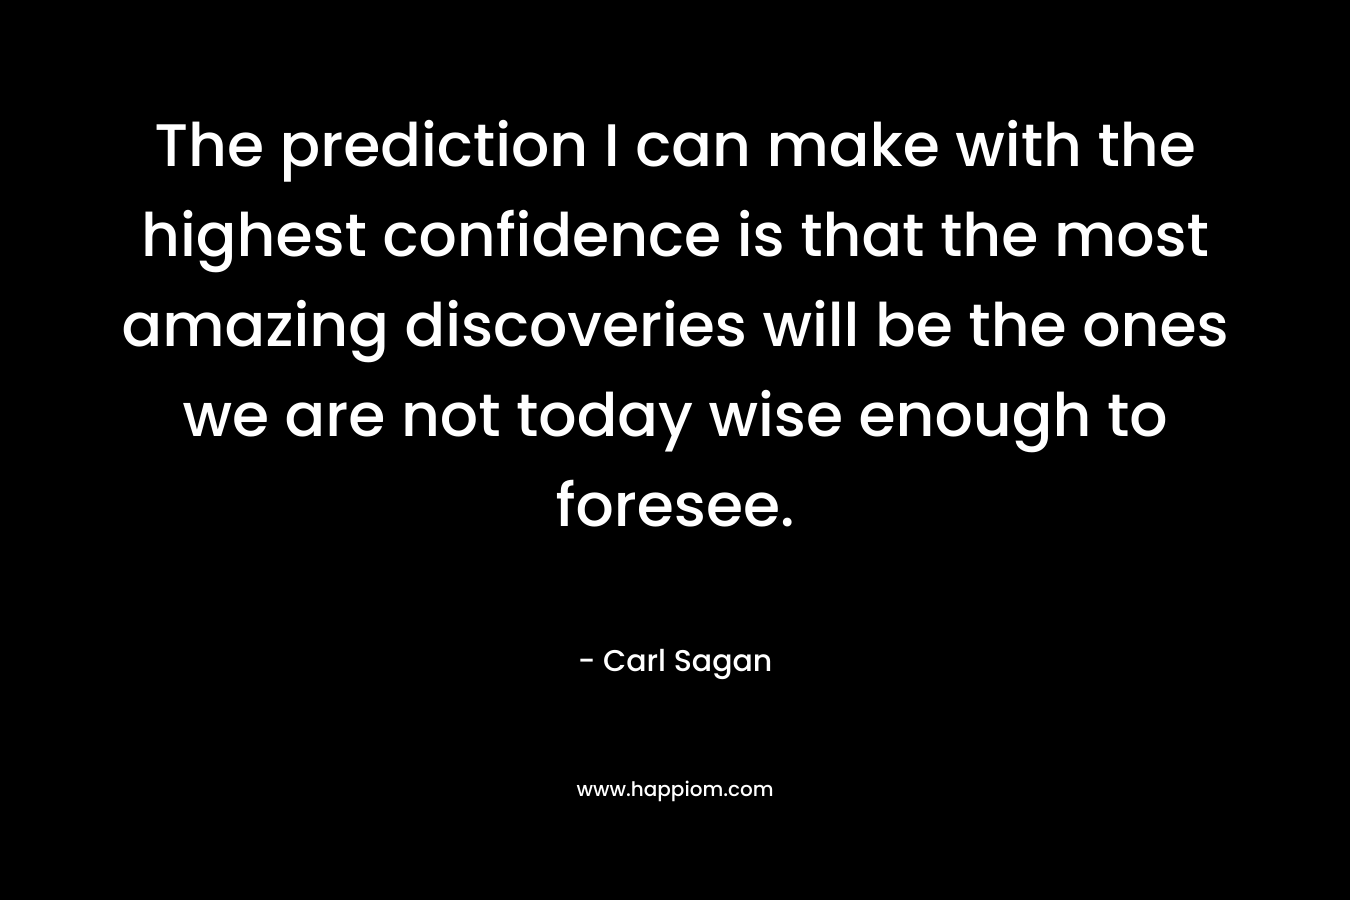 The prediction I can make with the highest confidence is that the most amazing discoveries will be the ones we are not today wise enough to foresee.